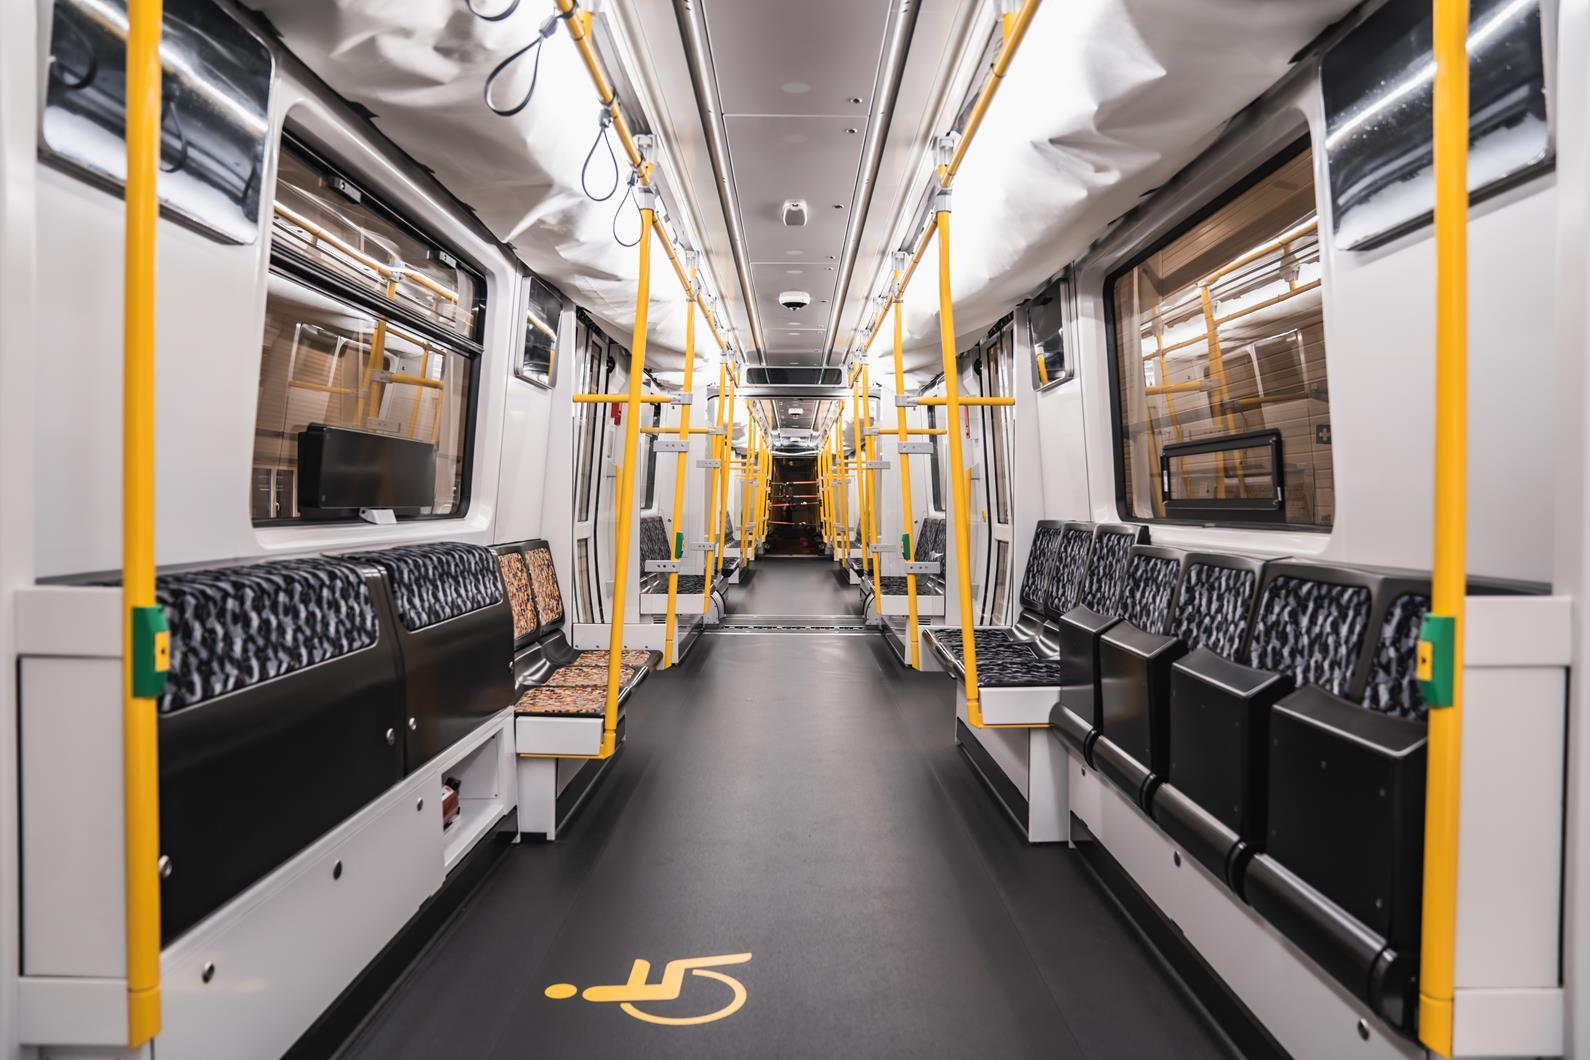 The interior of the JK-series four-car train